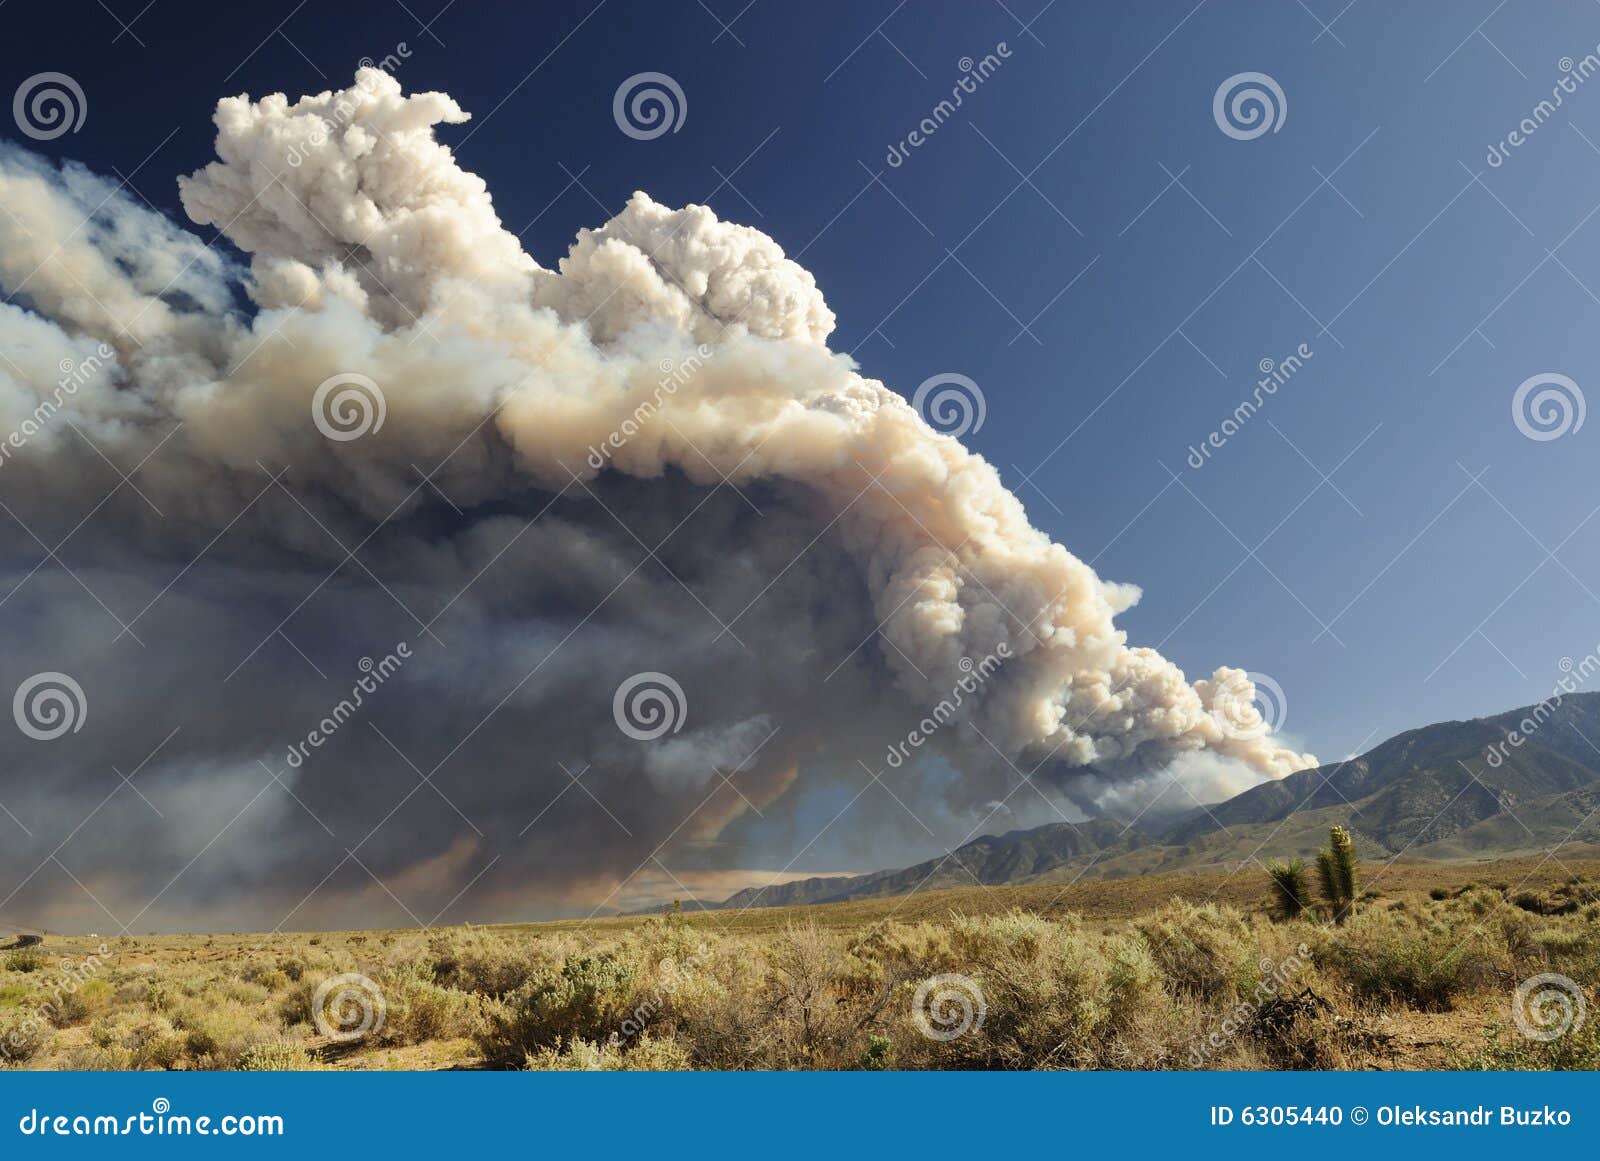 cloud of smoke from a california wildfire